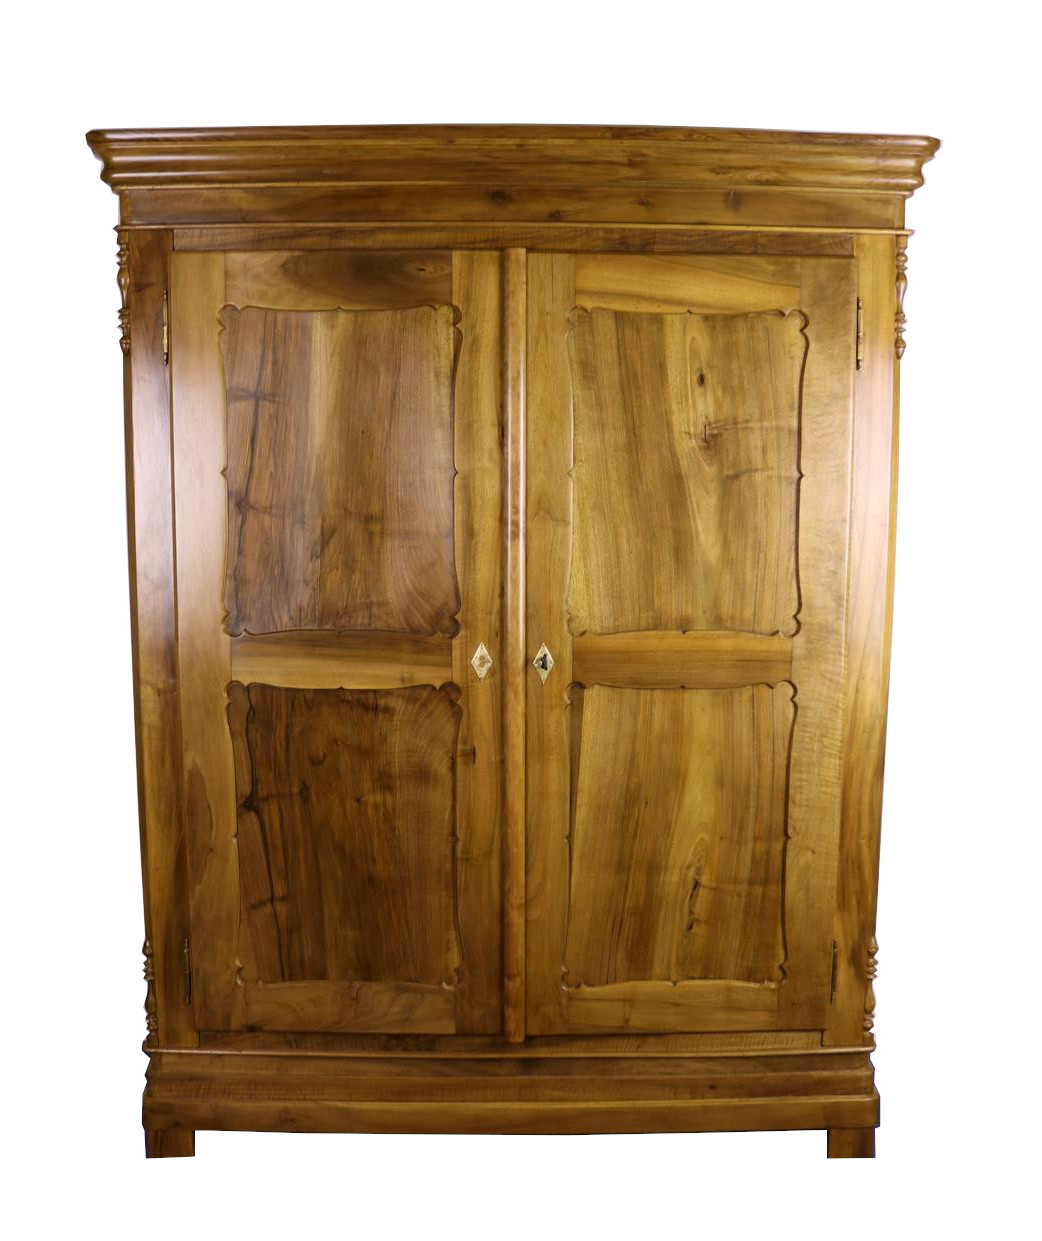 Biedermeier Cabinet With Carved Panel Doors Made Of Walnut Around